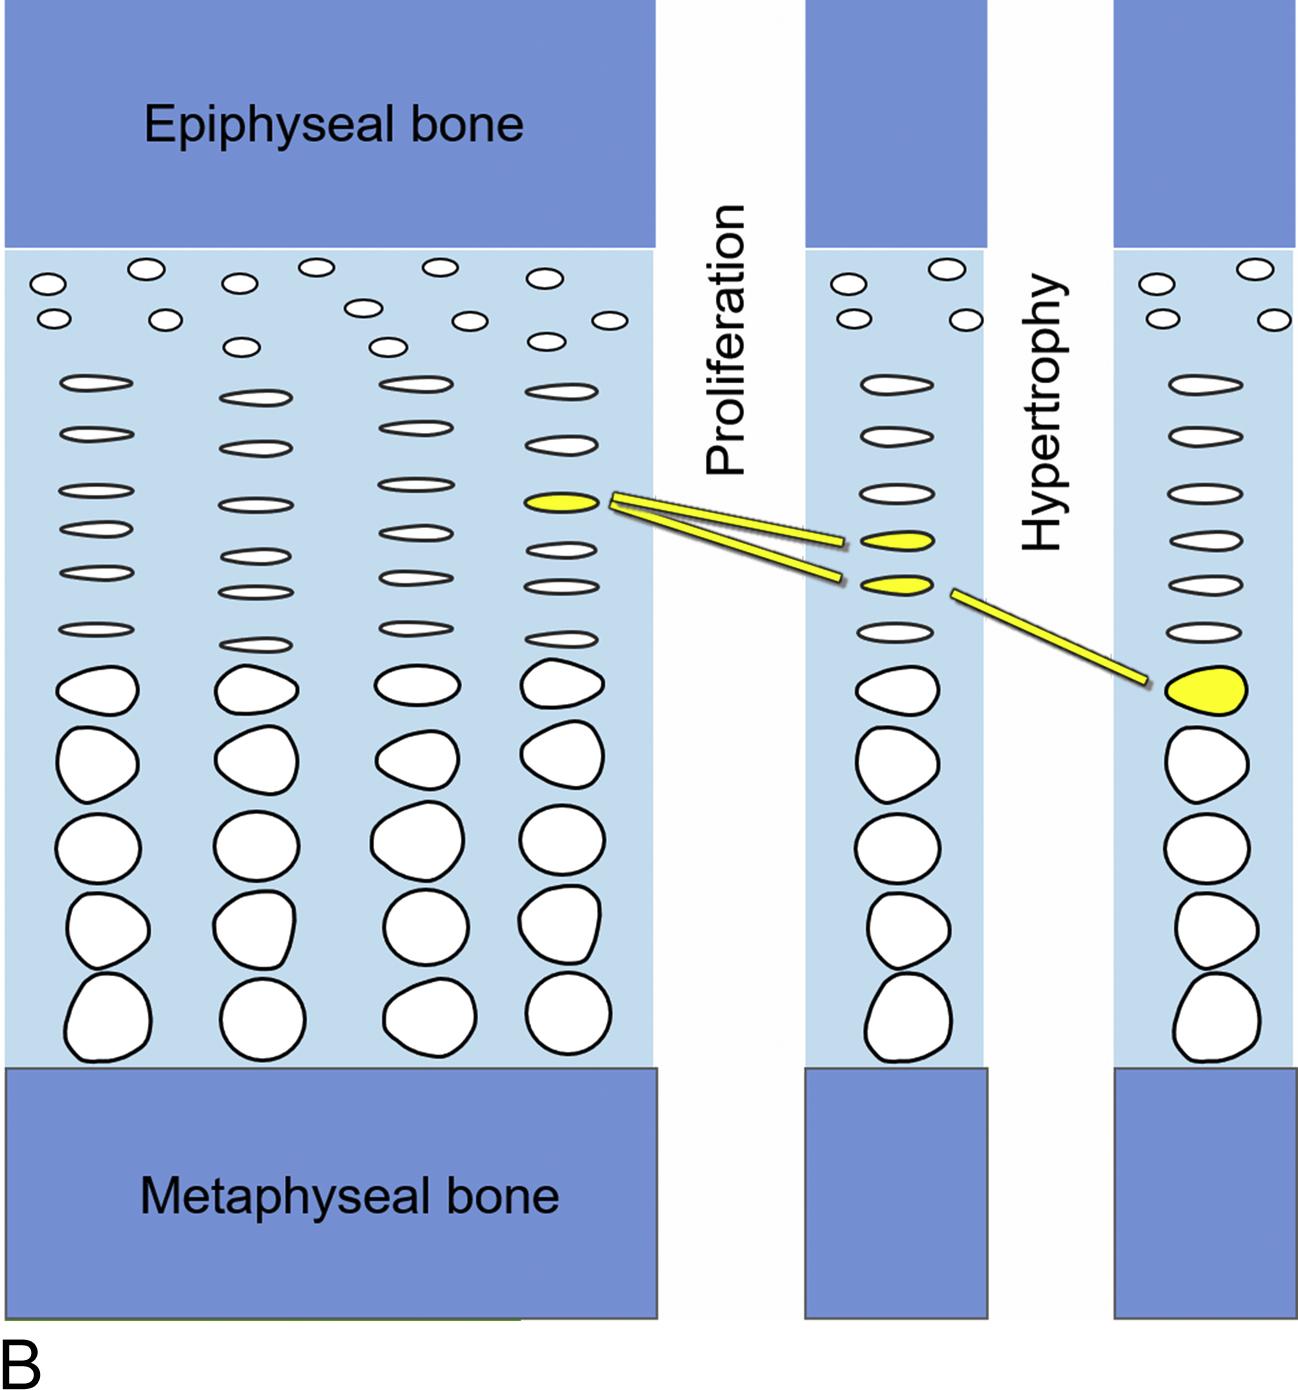 Fig. 11.1B, Growth plate function. Within the growth plate, chondrocytes first proliferate and later hypertrophy. The result is the production of more cartilage (chondrogenesis). At the bottom of the growth plate, the newly formed cartilage is remodeled into bone (not shown). The net result is that new bone is created at the bottom of the growth plate, gradually pushing apart the ends of the bone, causing the bones to grow longer and the child to grow taller.